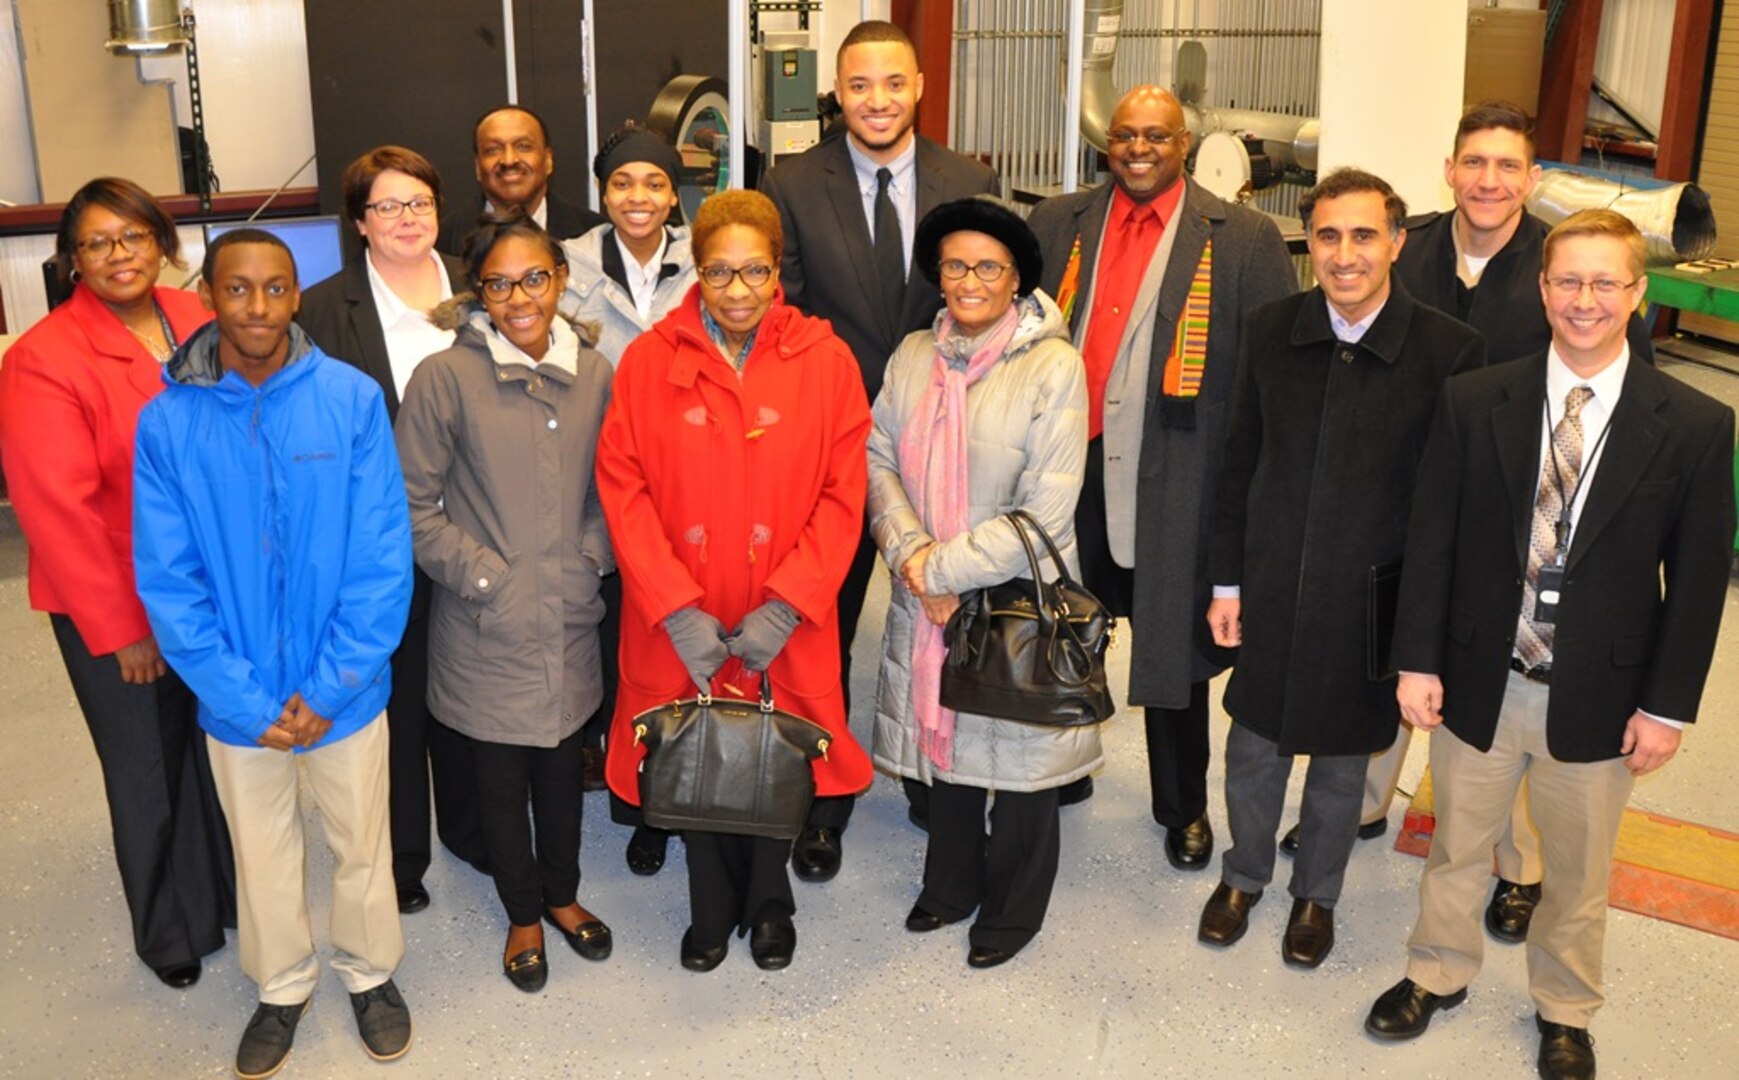 IMAGE: DAHLGREN, Va. (Feb. 2, 2018) - Hampton University officials, professors, and students are pictured with leaders from Naval Surface Warfare Center Dahlgren Division (NSWCDD) at the NSWCDD High Power Laser Facility during their tour of Dahlgren laboratories and test sites. NSWCDD leaders and technologists - including Hampton University alumni currently working at Dahlgren as scientists and engineers - briefed the Hampton University delegation on the command's mission, capabilities and technological programs as well as human resources initiatives. 
In turn, Dr. Danny Barnes, Hampton University director for cyber security and computer information systems - briefed NSWCDD officials about Hampton University which is comprised of seven schools - business, engineering and technology, liberal arts and education, nursing, pharmacy, science, Scripps Howard School of Journalism and Communications, and the University College.